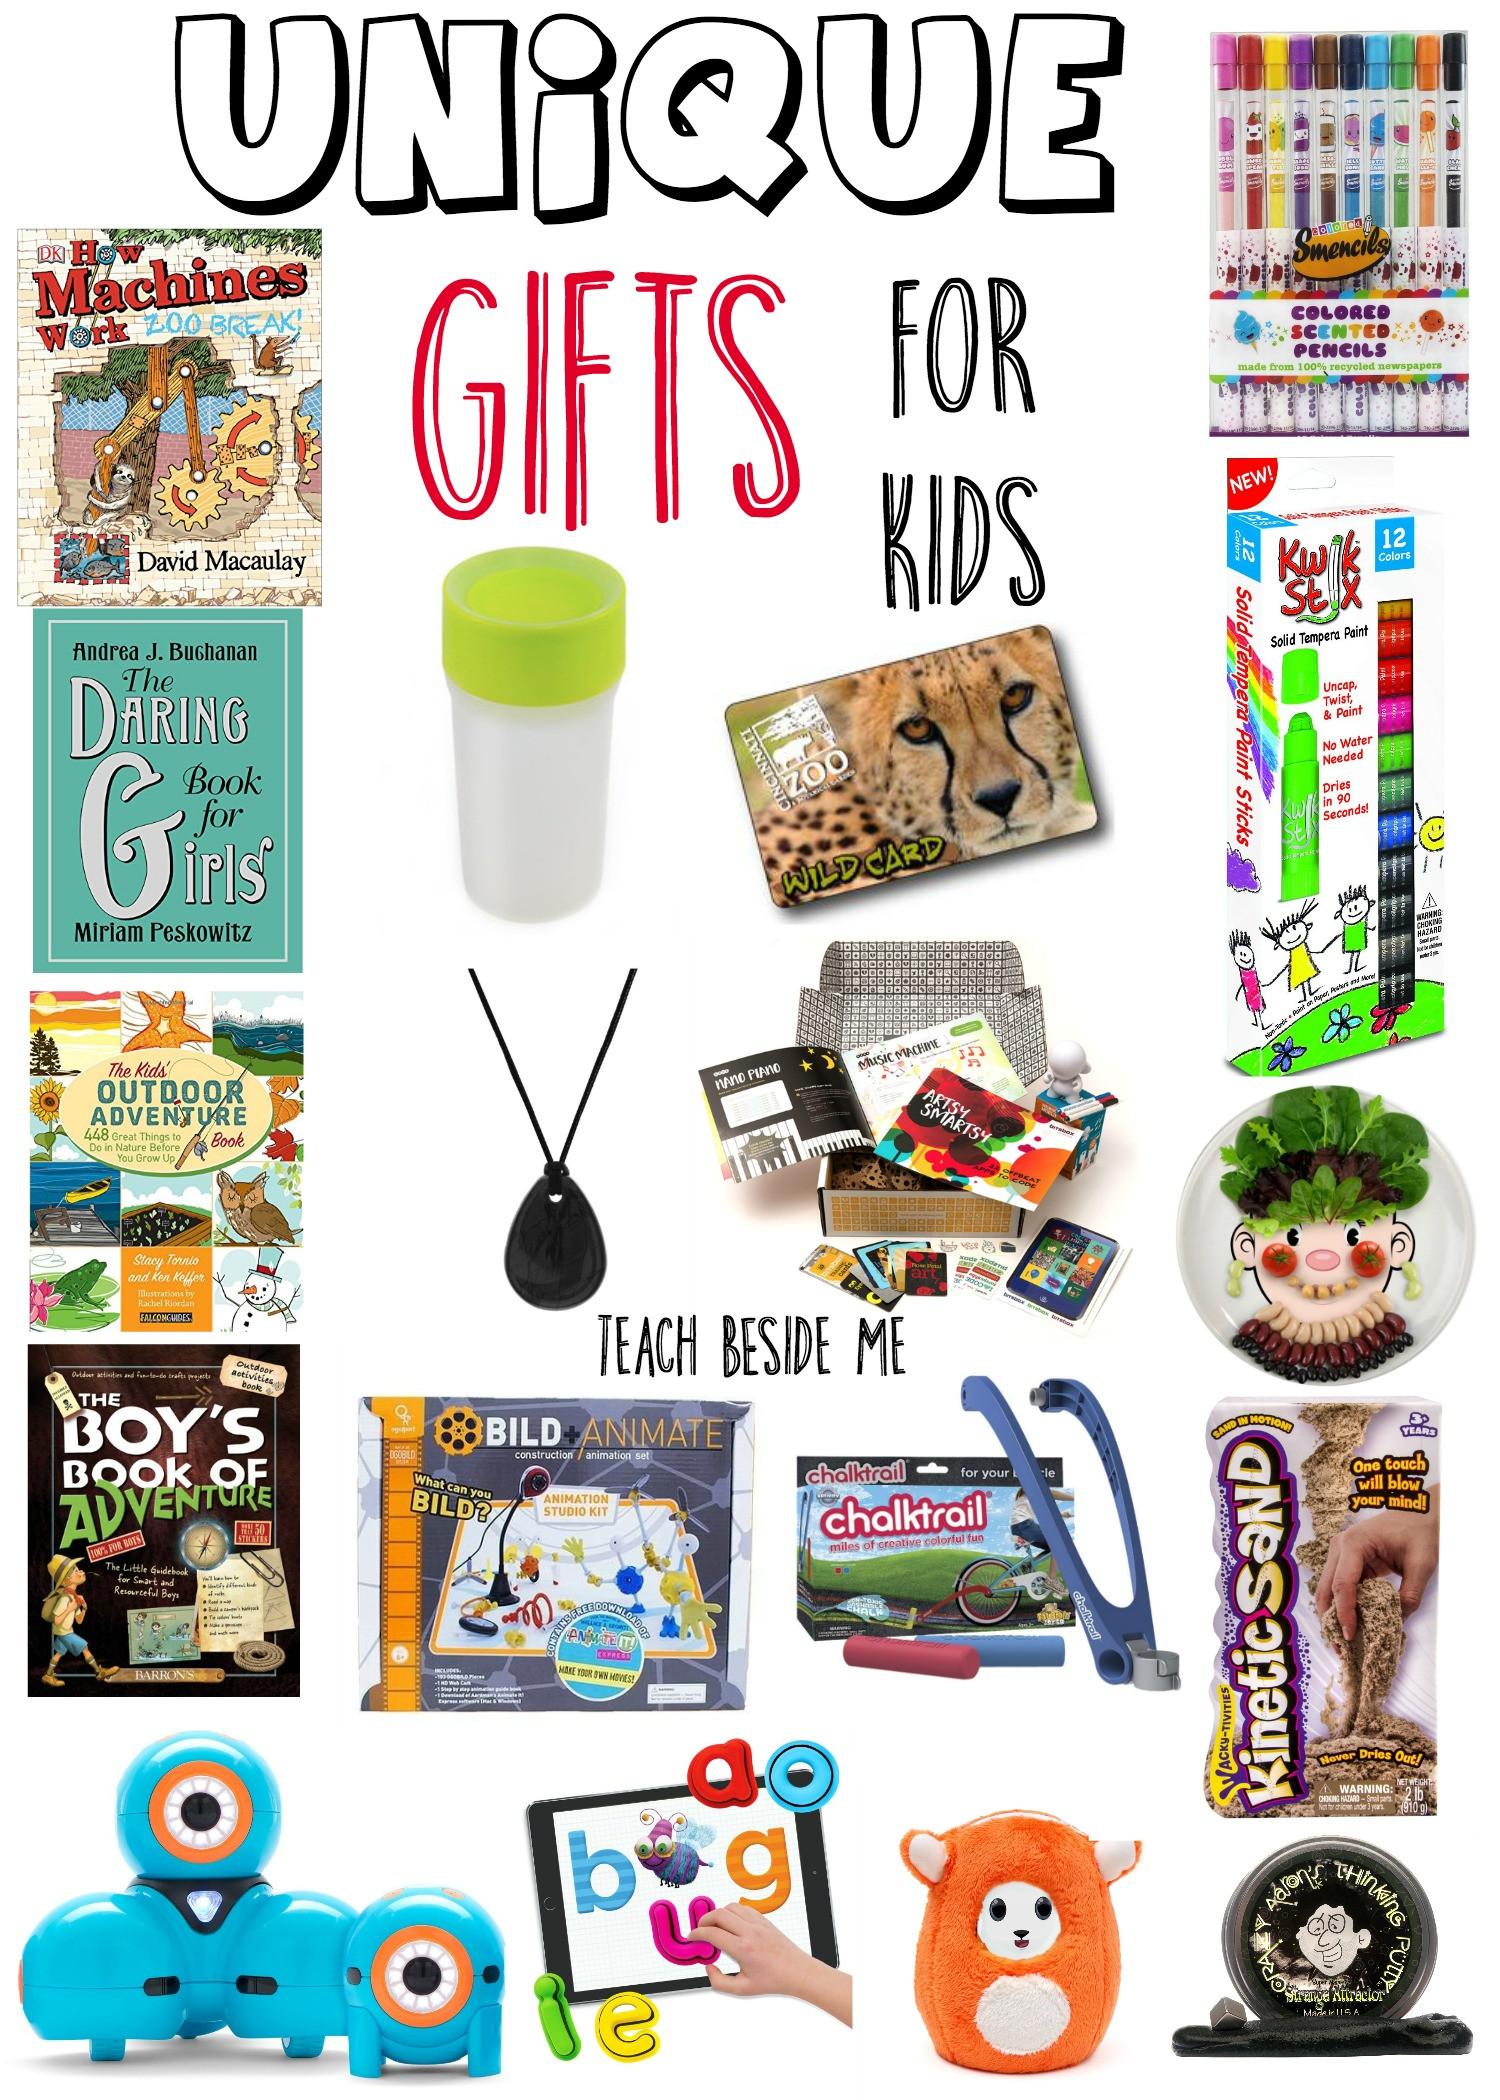 Fun Gifts For Kids
 Unique Gifts for Kids Teach Beside Me